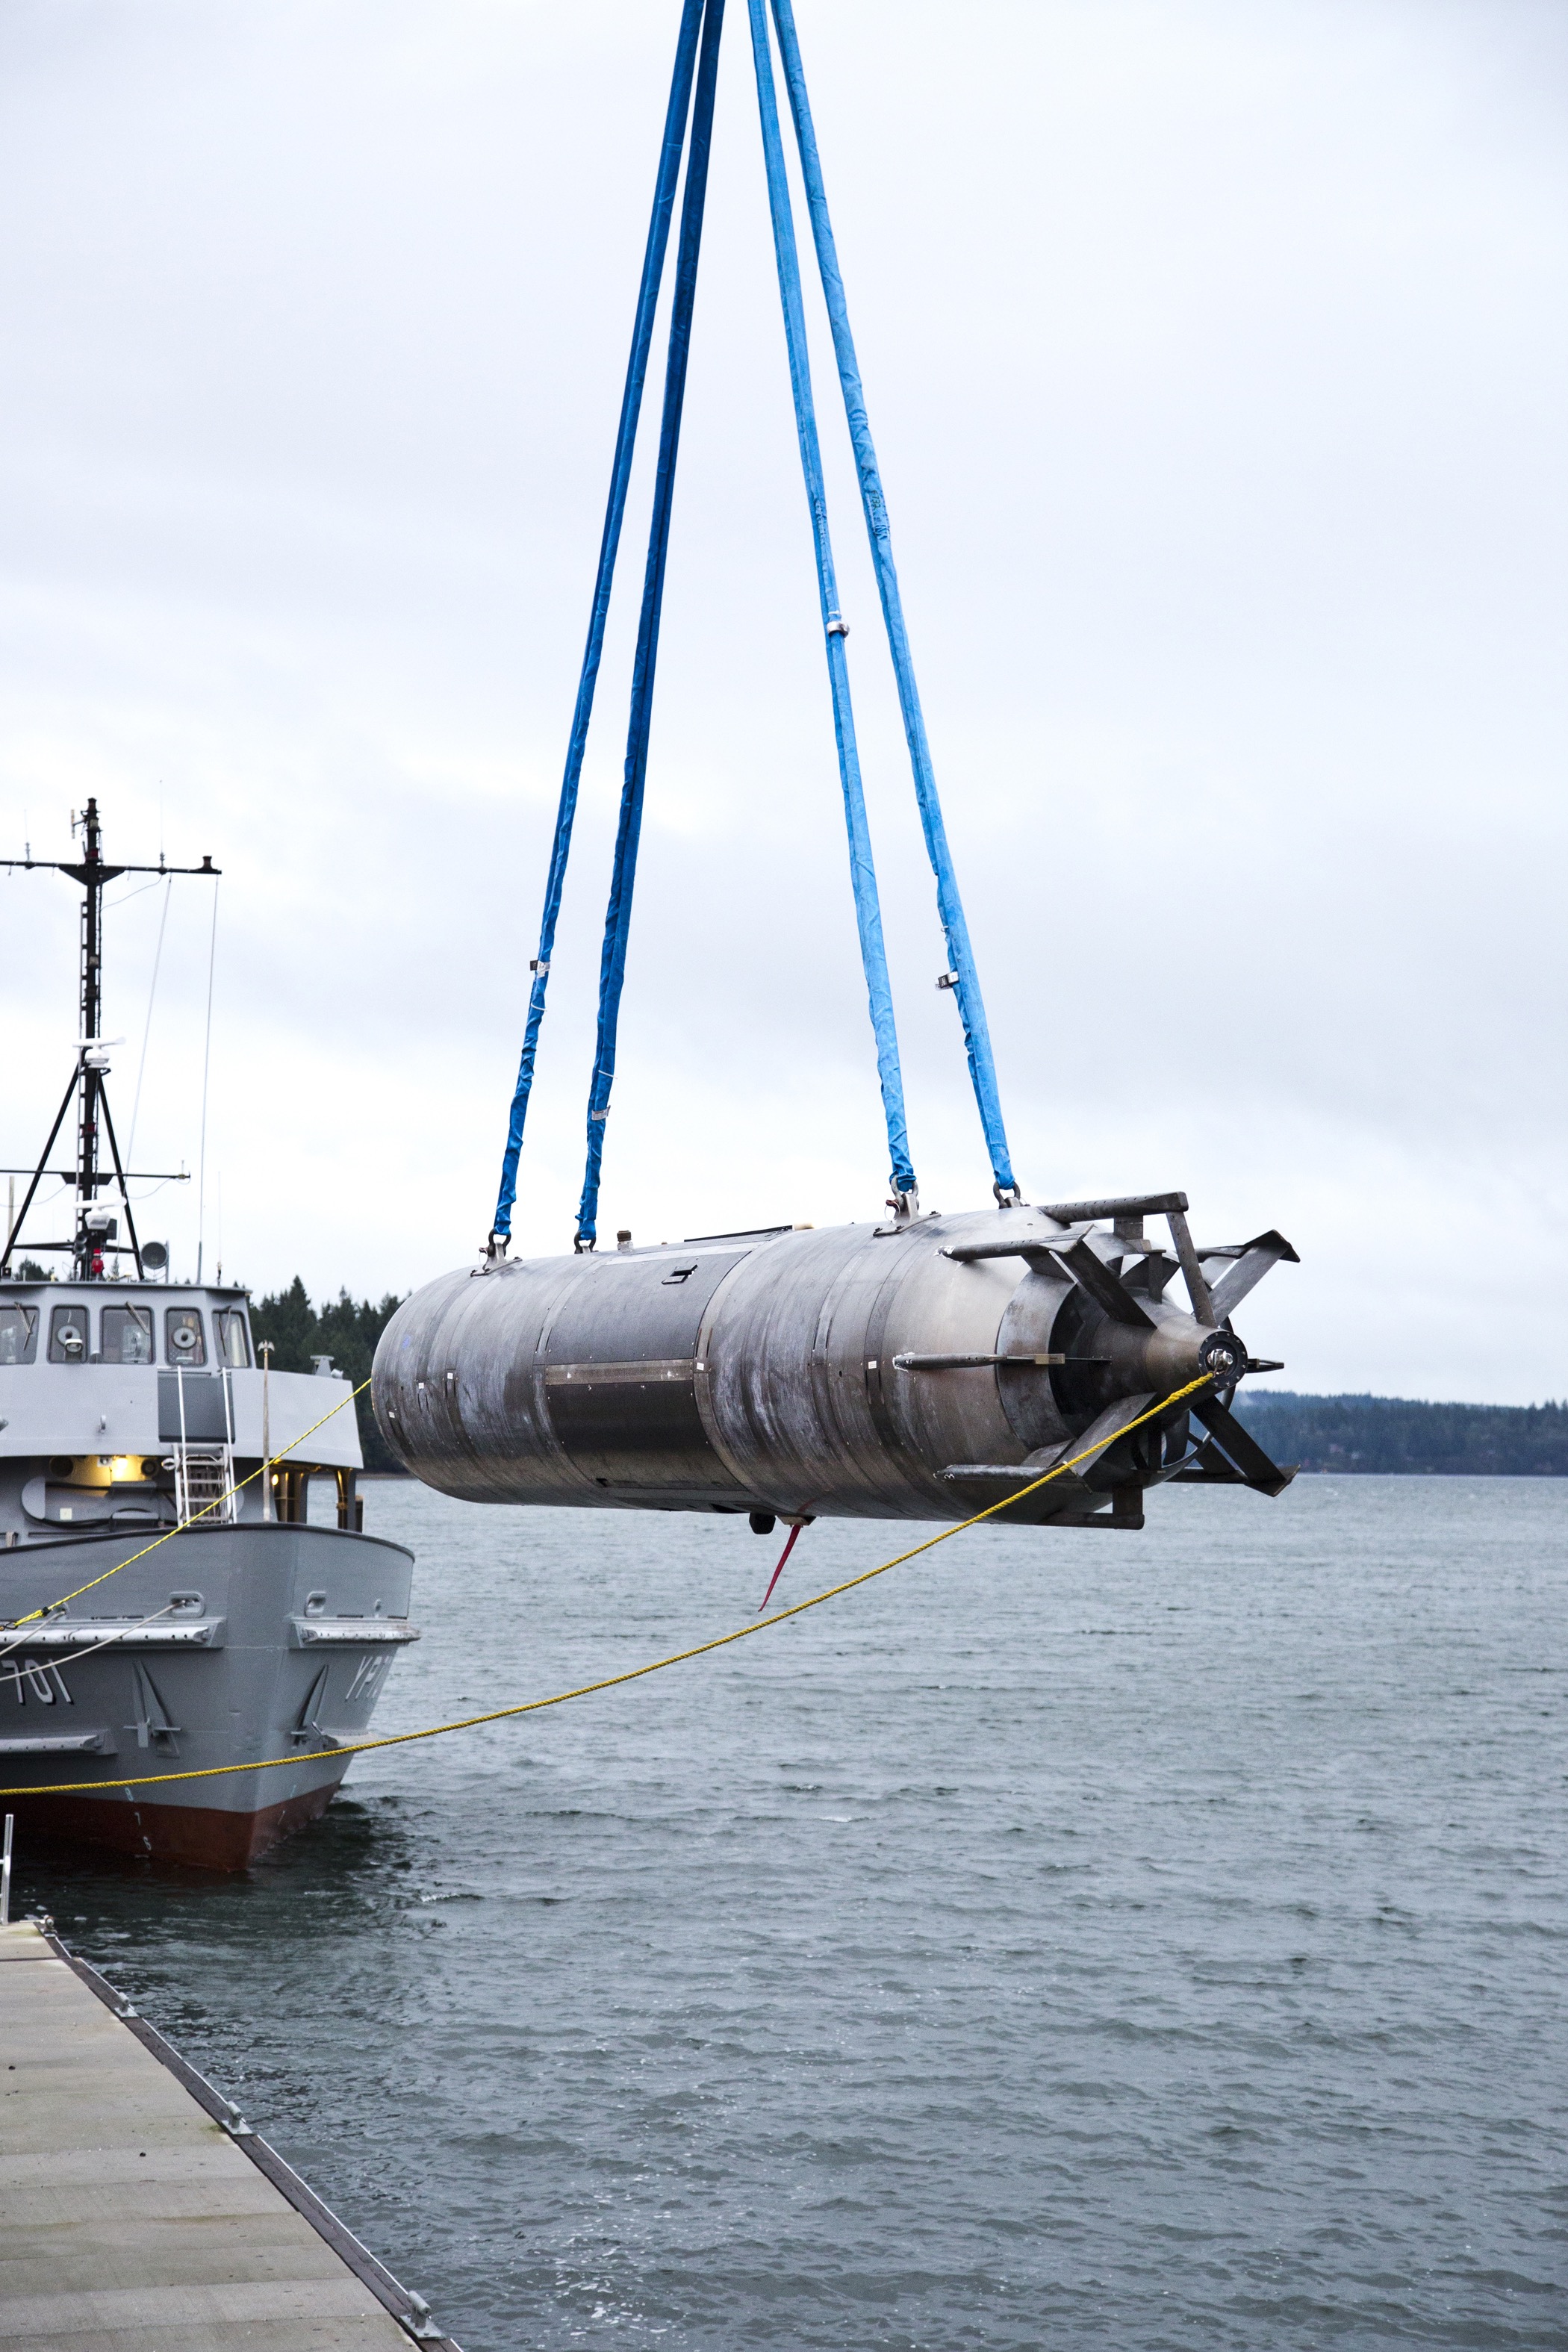 A surrogate Large Displacement Unmanned Undersea Vehicle (LDUUV) is submerged in the water in preparation for a test to demonstrate the capability of the Navy's Common Control System (CCS) at the Naval Undersea Warfare Center Keyport in Puget Sound, Wash. in December 2015. US Navy photo.